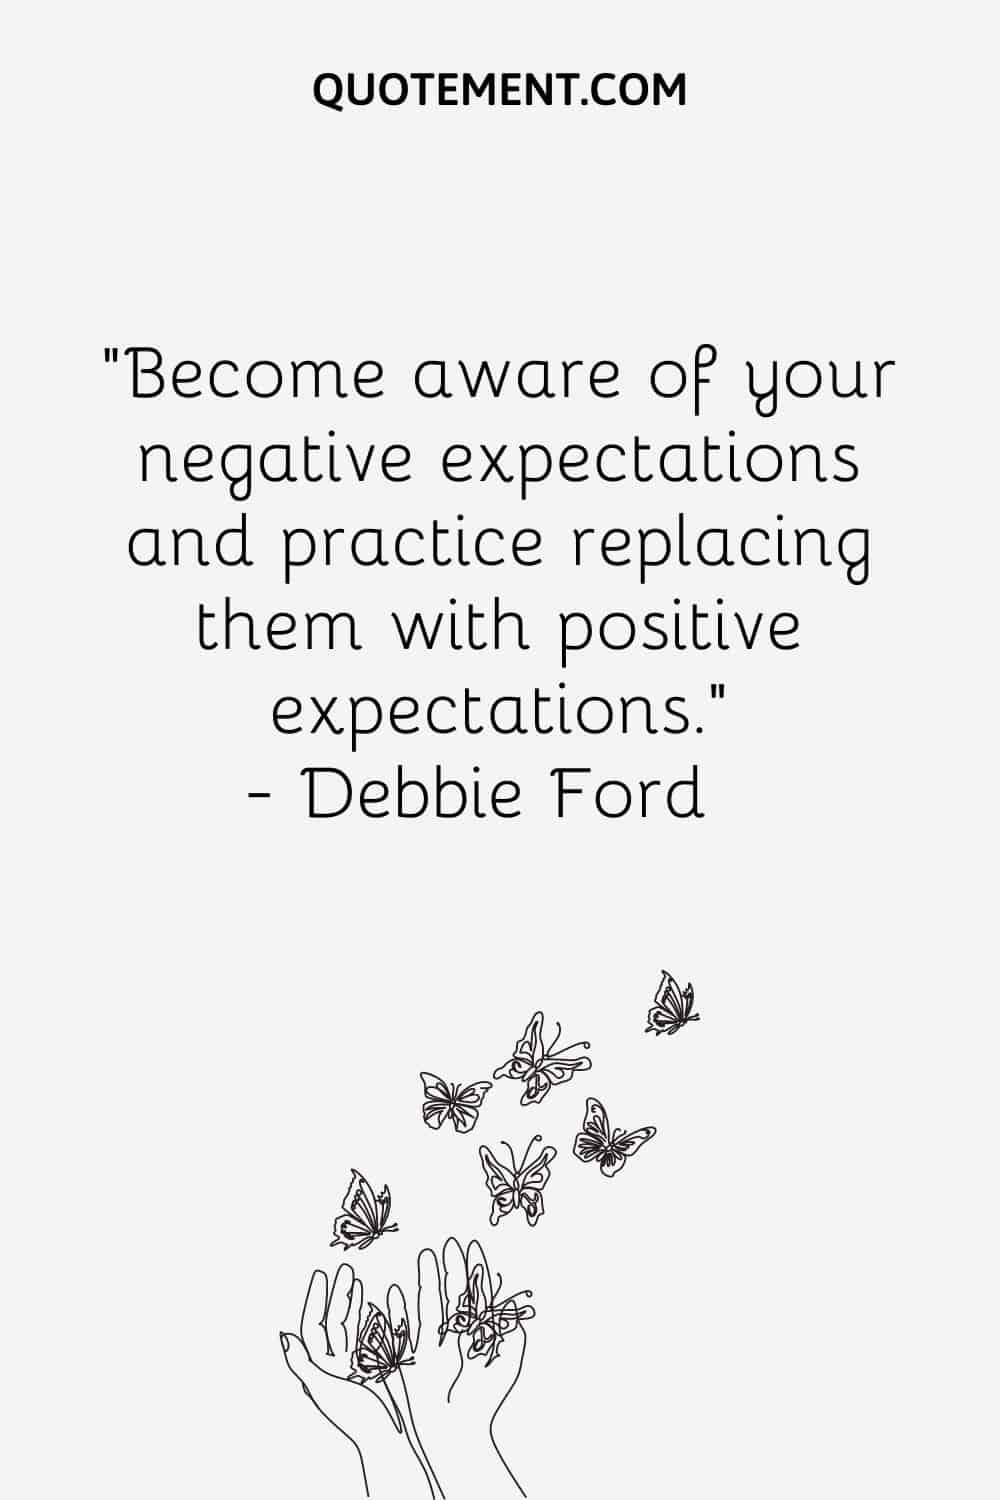 Become aware of your negative expectations and practice replacing them with positive expectations